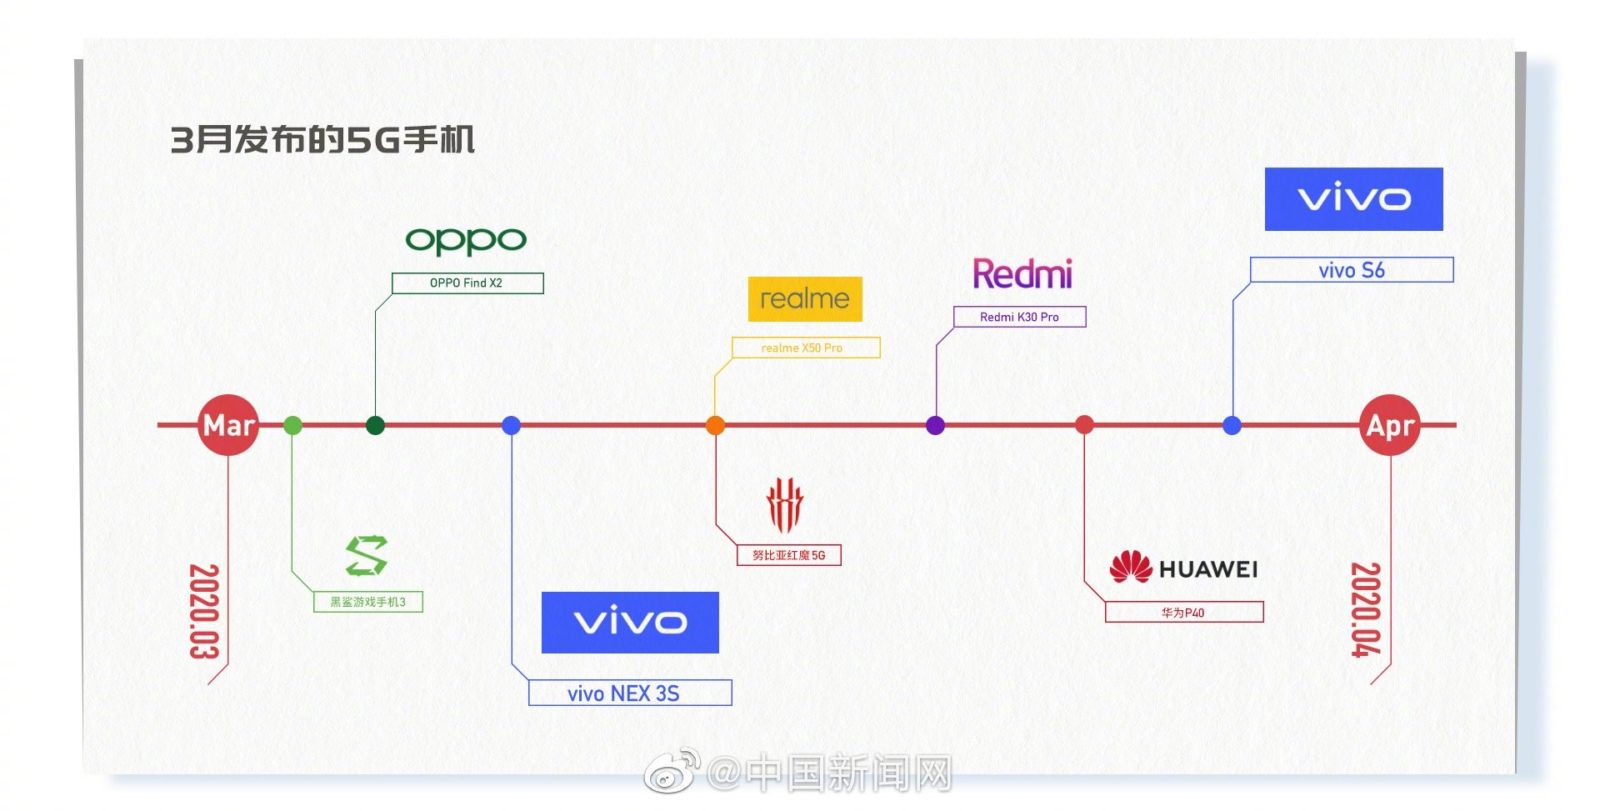 Vivo S6 Will Launch With 5G Support in March